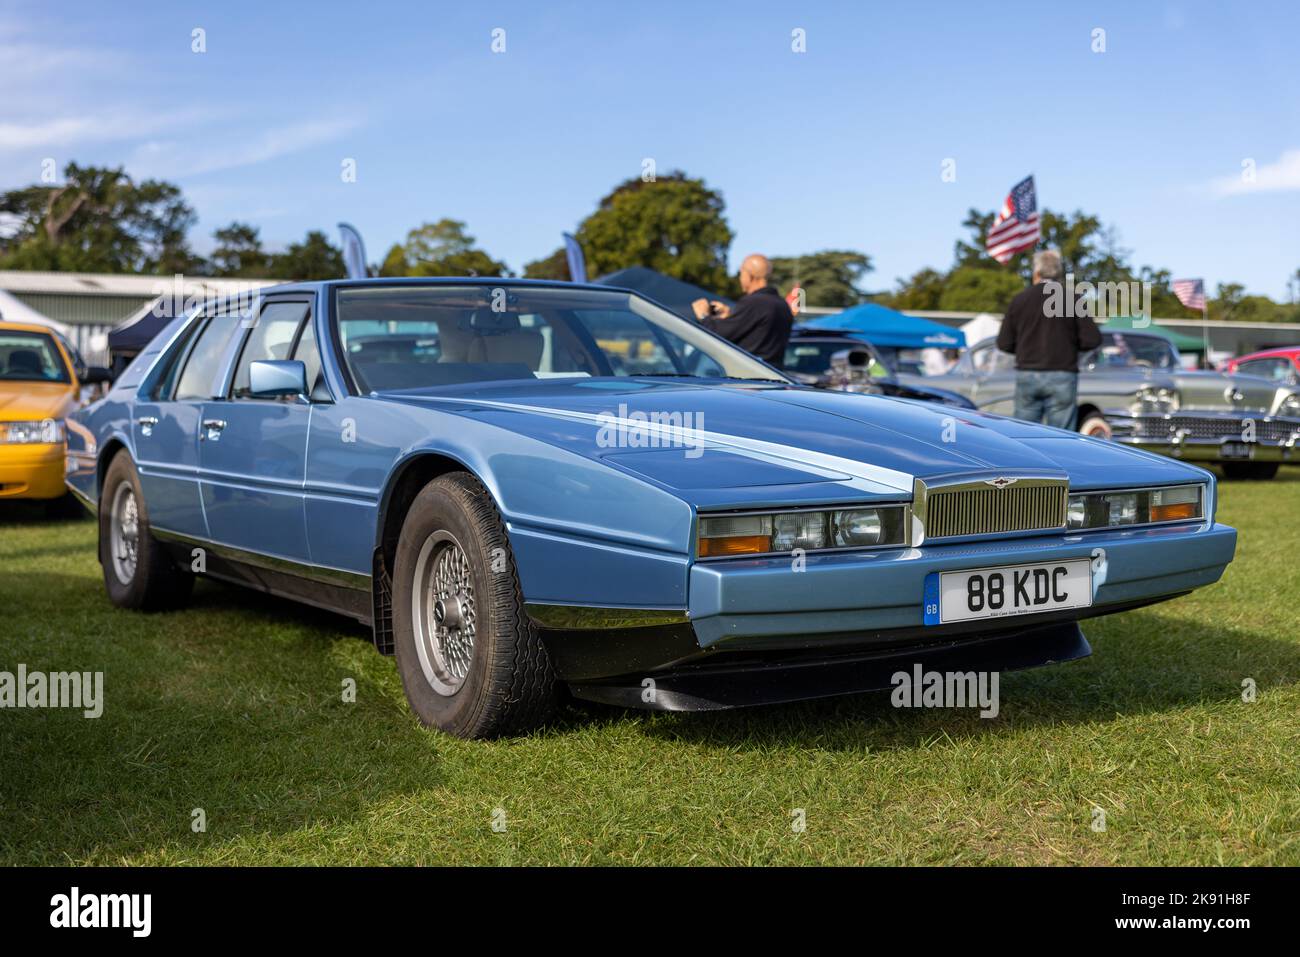 1984 Aston Martin Lagonda ‘88 KDC’ on display at the Race Day Airshow held at Shuttleworth on the 2nd October 2022 Stock Photo